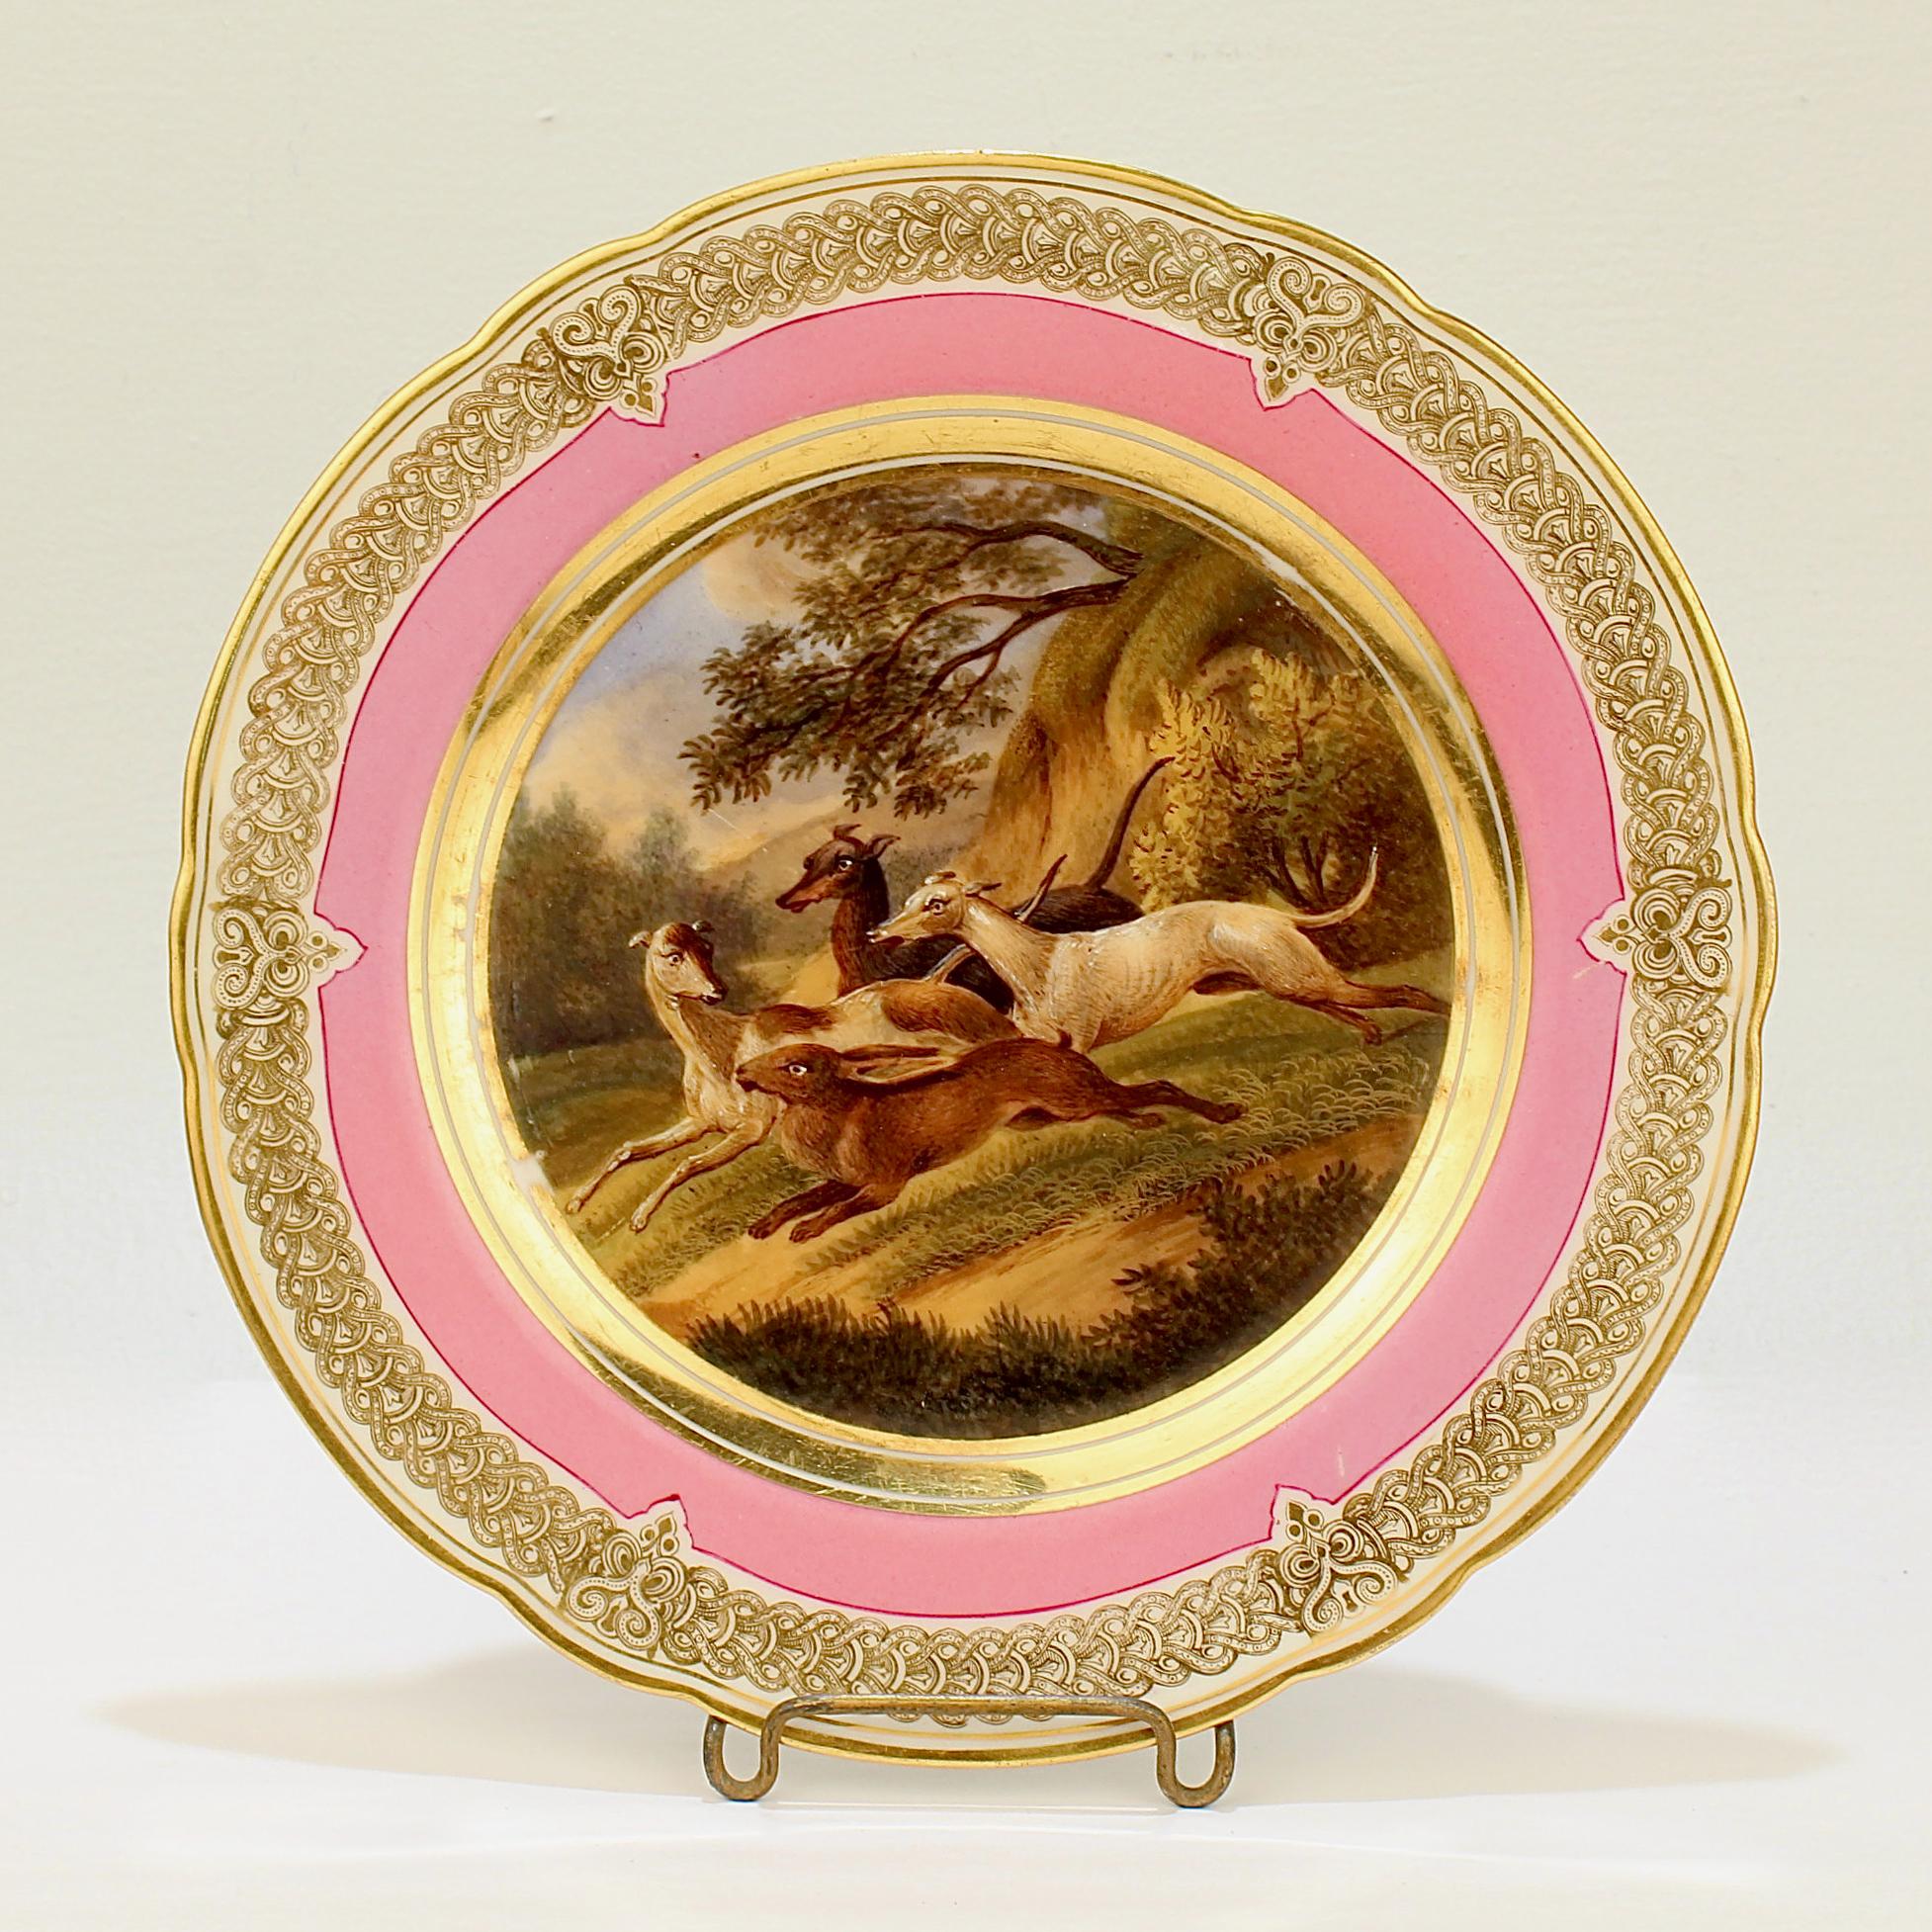 A wonderful antique 19th century Paris porcelain plate.

With a hand painted scene of a rabbit hunt in a bucolic landscape. Three greyhounds or whippets are giving chase.

It has a rich pink border and an elaborate gilt design to the rim and a